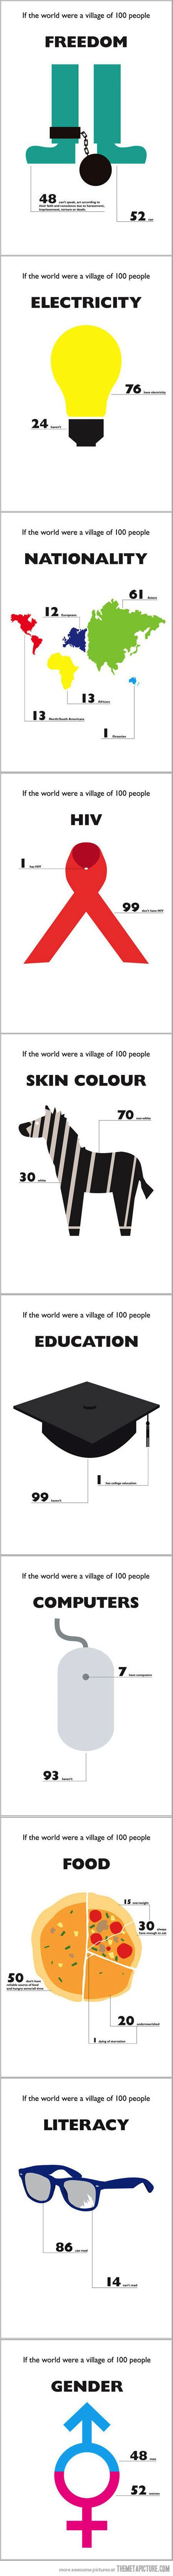 If the world were a village of 100 people…